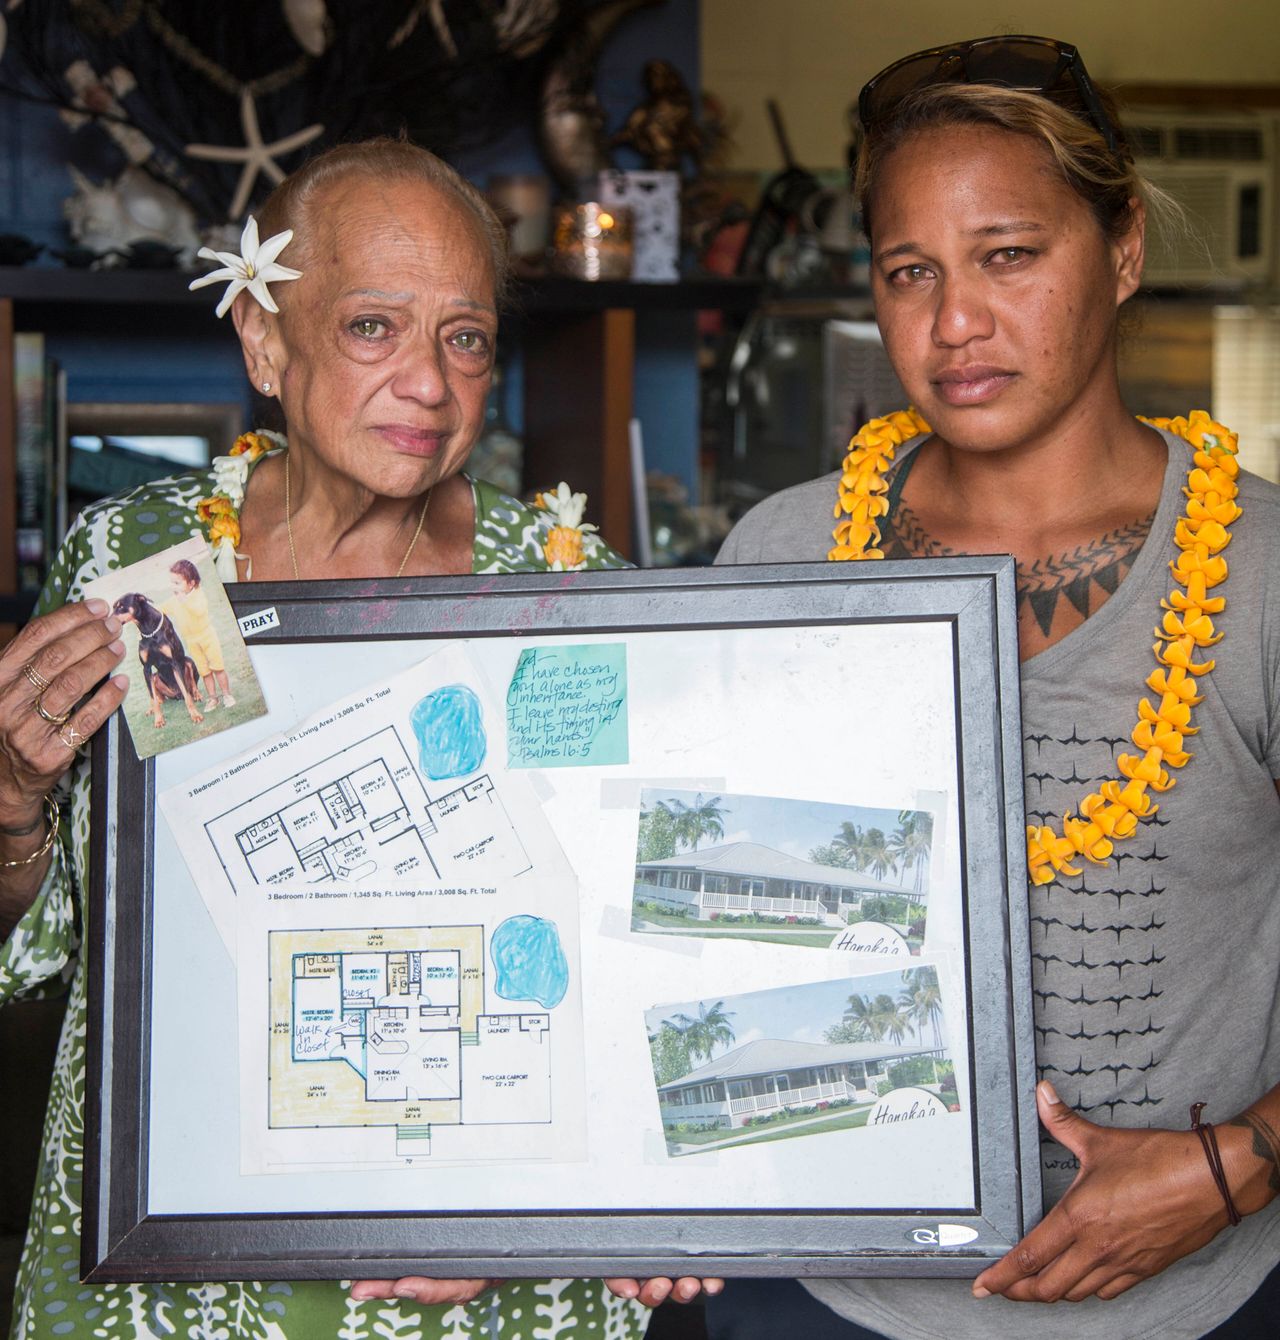 Joddy ʻIwalani Manuwai and her daughter Kaʻiulani Manuwai hold the blueprints for what their home was supposed to look like after renovations.